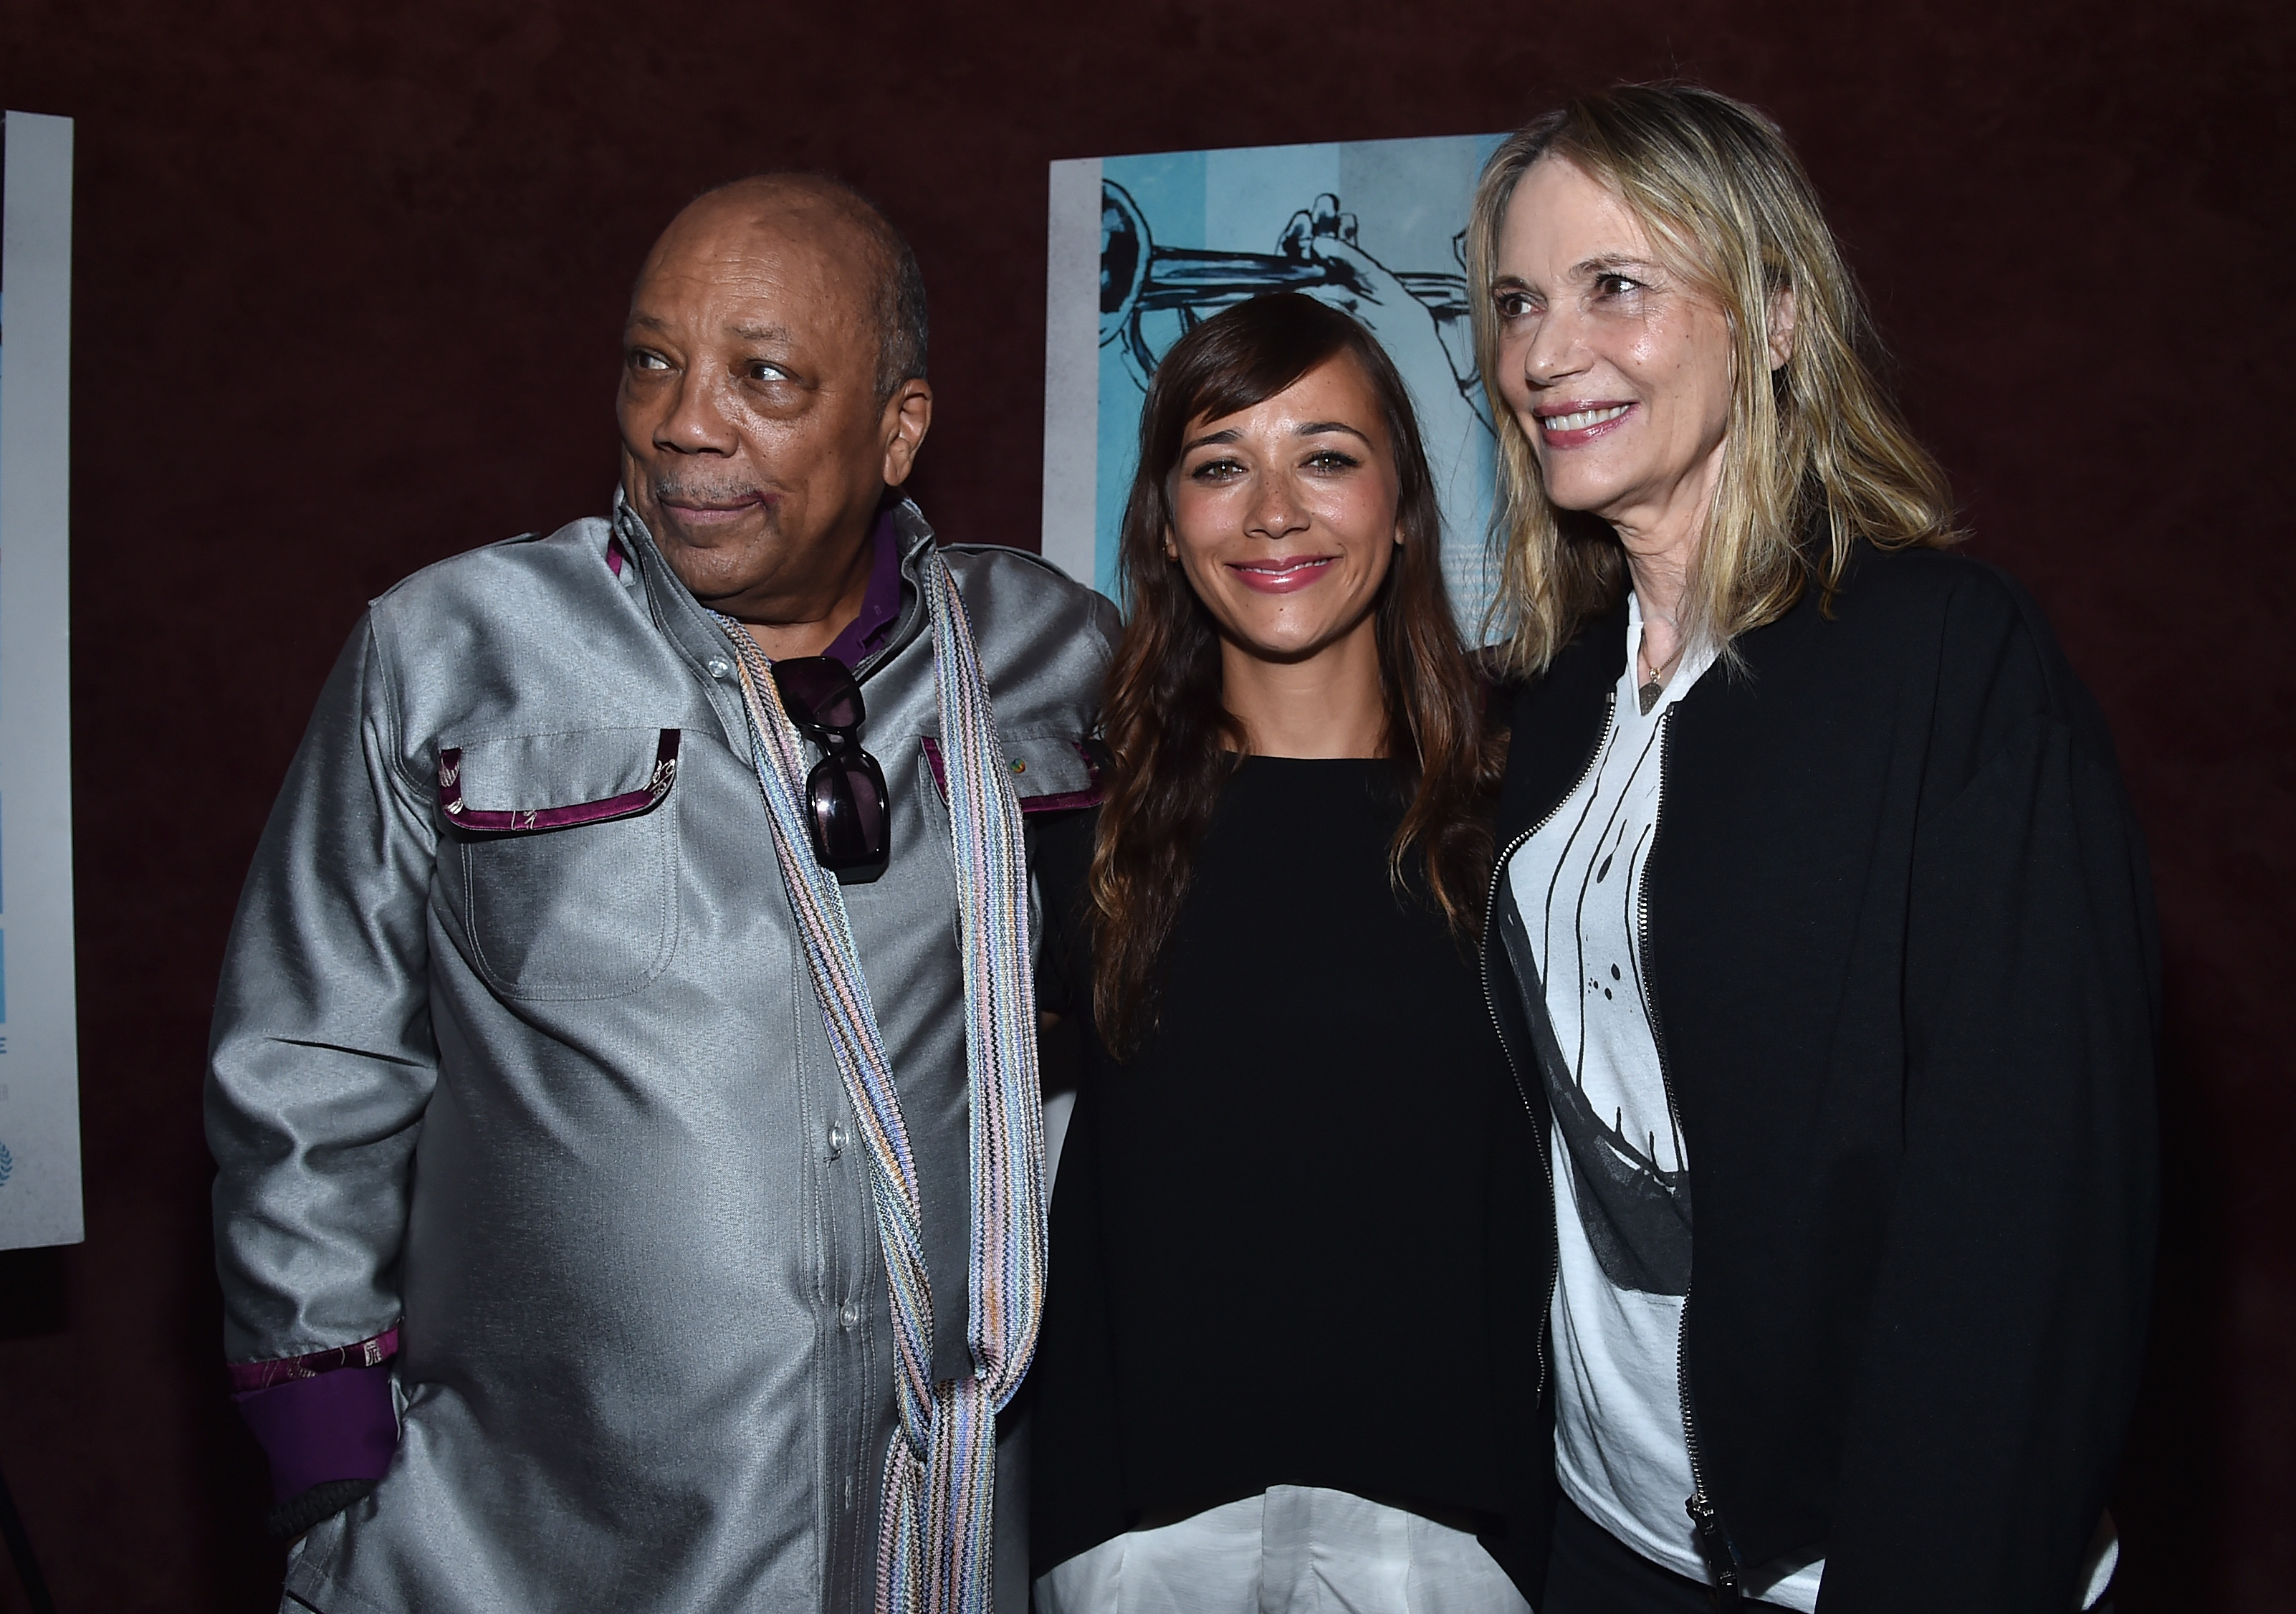  Quincy Jones, Rashida Jones and Peggy Lipton pose as they arrive at the premiere of RADIUS-TWC's "Keep On Keepin' On" at Landmark Theatre on September 17, 2014, in Los Angeles, California | Source: Getty Images